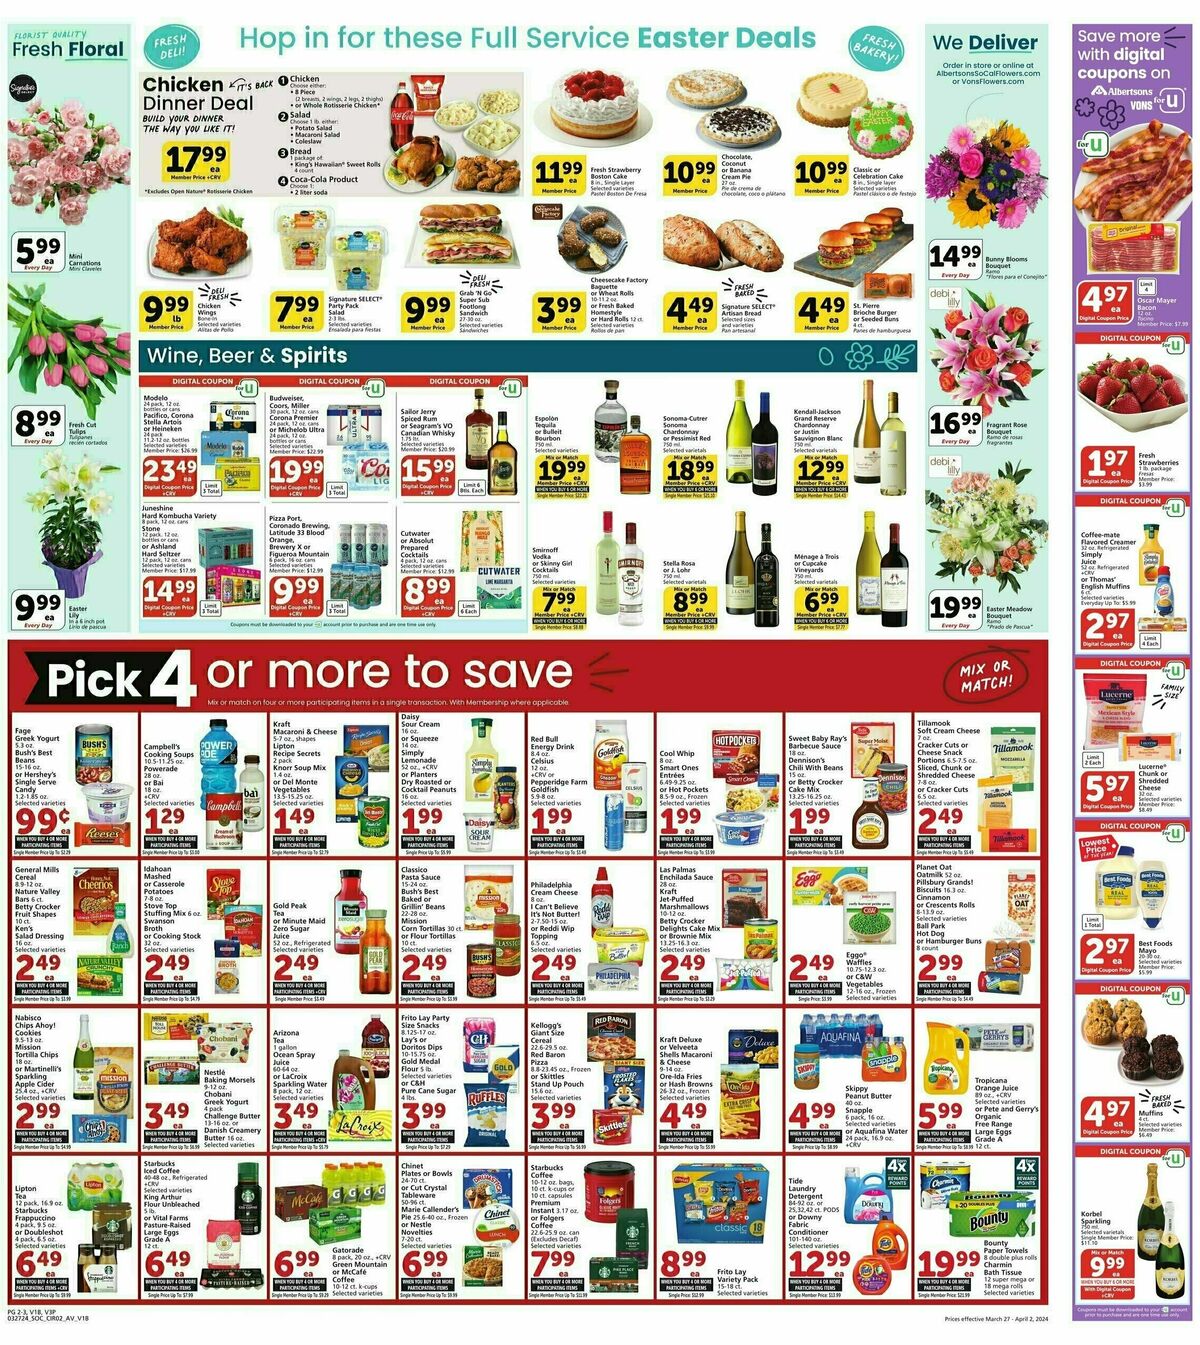 Vons Weekly Ad from March 27